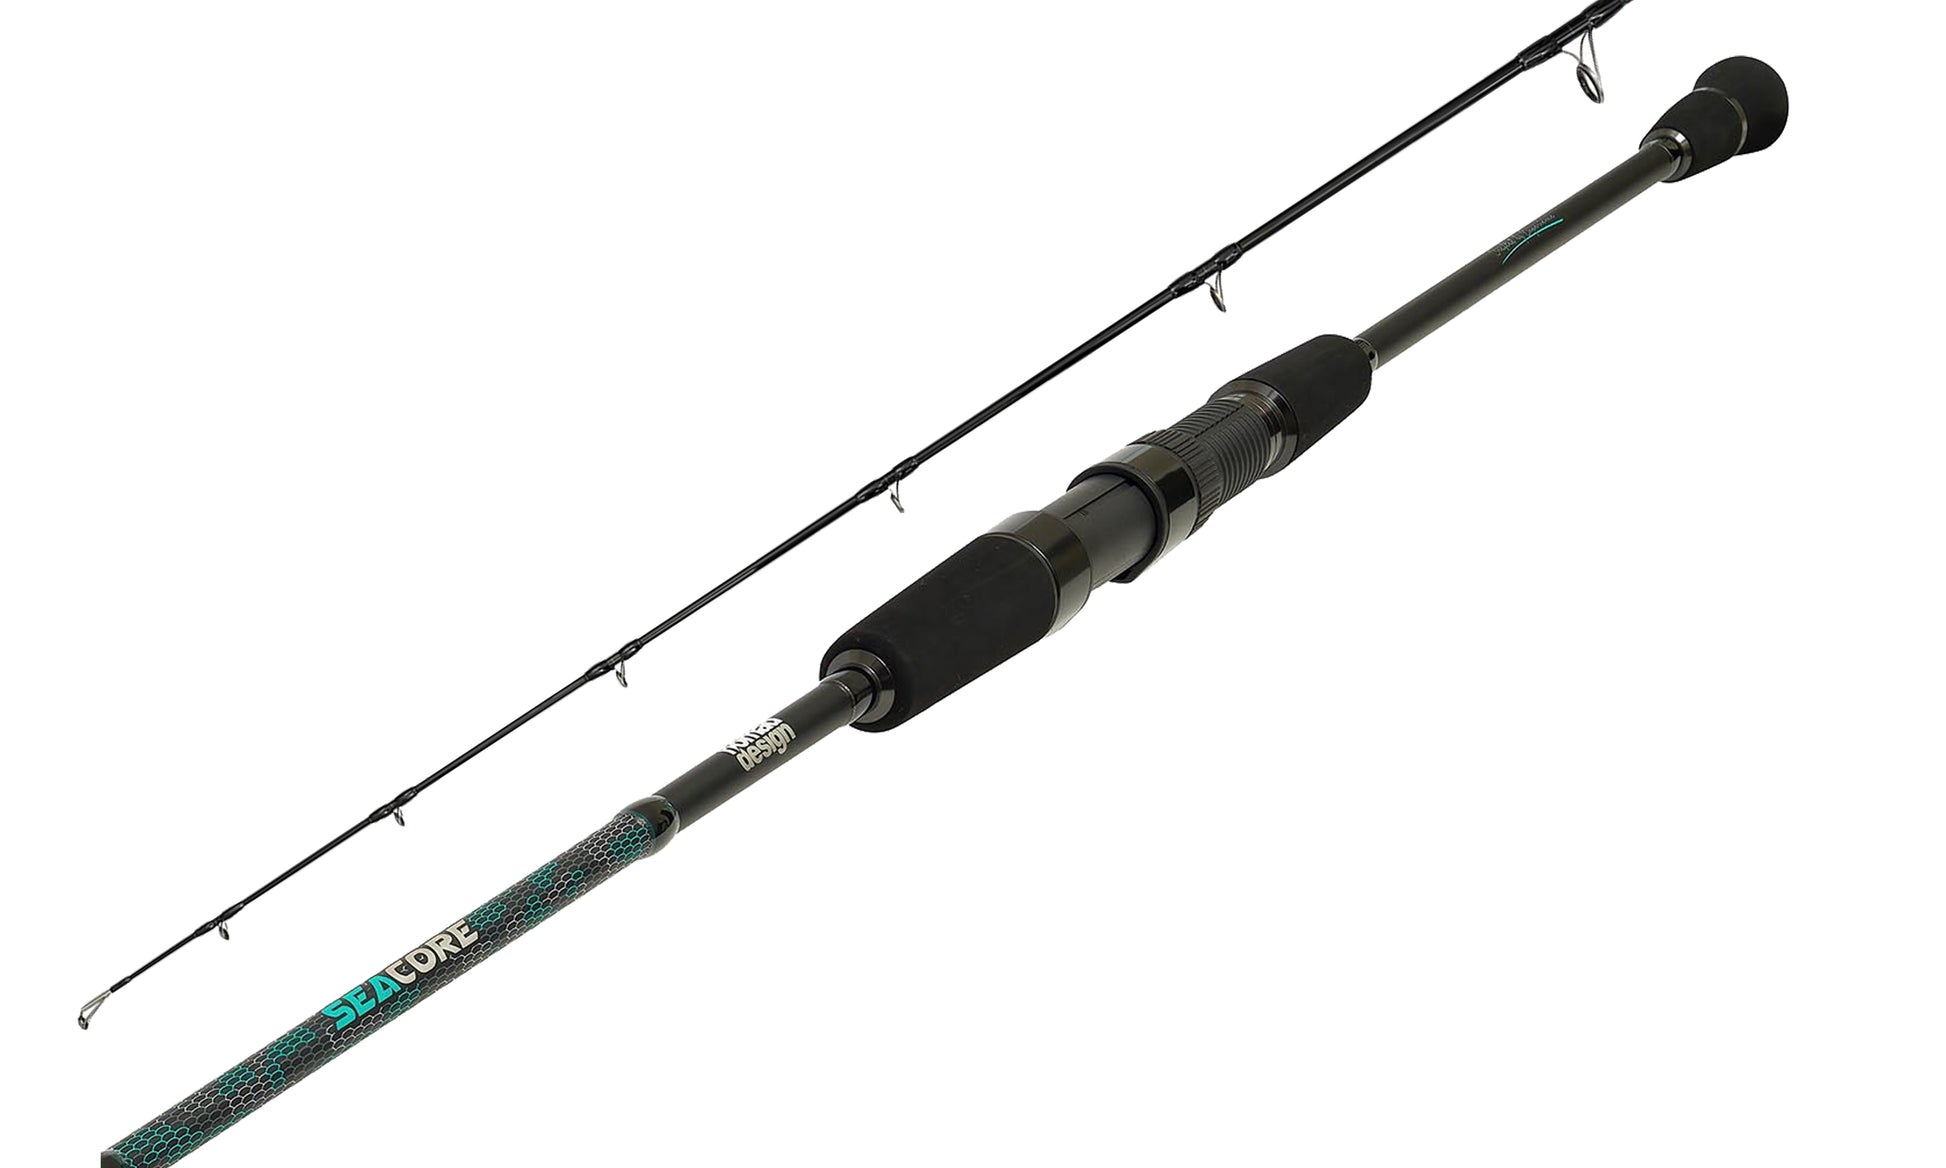 Slow Pitch Jigging Rod - Nomad - SEACORE SLOW PITCH JIGGING RODS